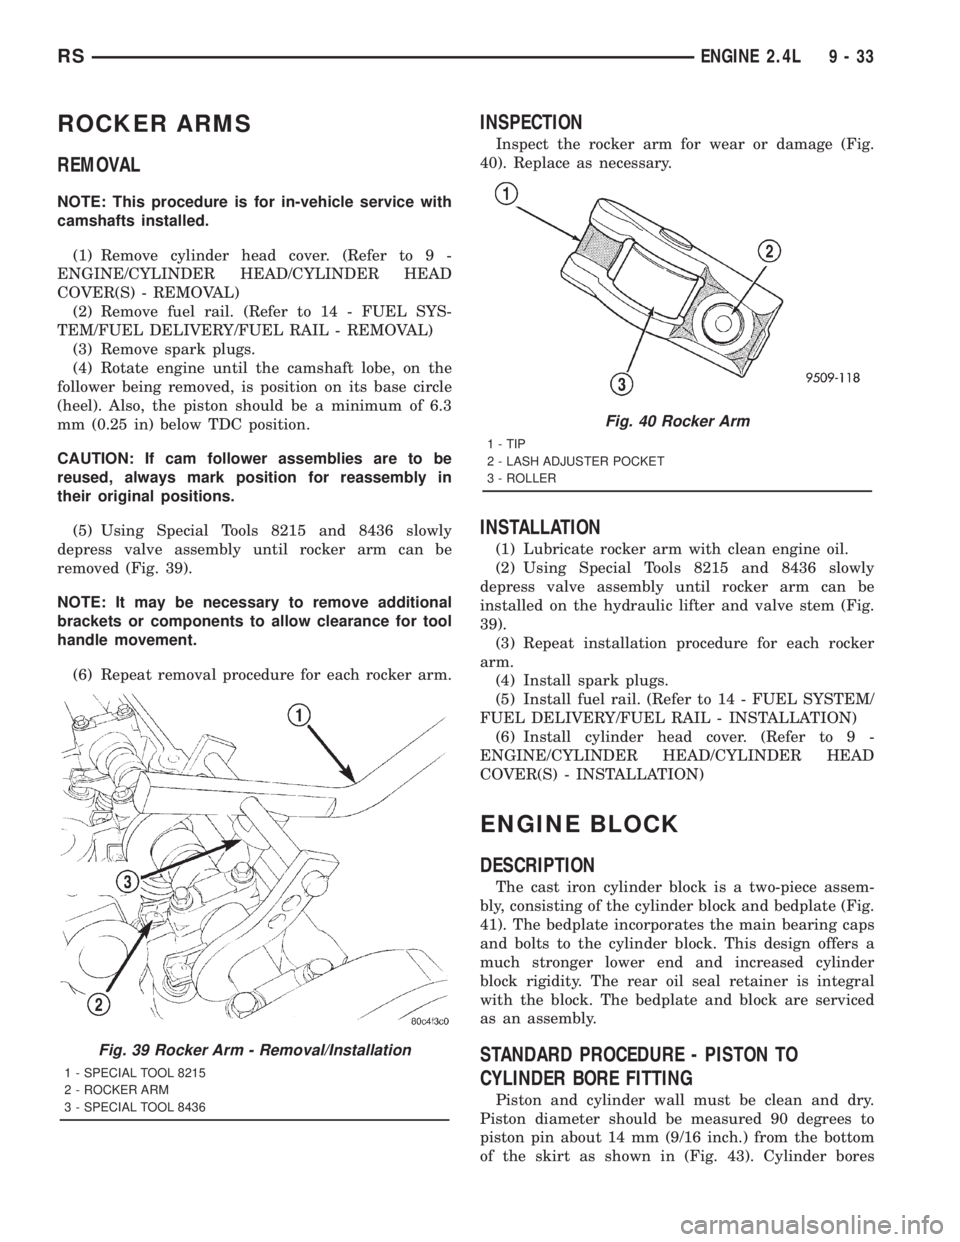 CHRYSLER VOYAGER 2001  Service Manual ROCKER ARMS
REMOVAL
NOTE: This procedure is for in-vehicle service with
camshafts installed.
(1) Remove cylinder head cover. (Refer to 9 -
ENGINE/CYLINDER HEAD/CYLINDER HEAD
COVER(S) - REMOVAL)
(2) Re